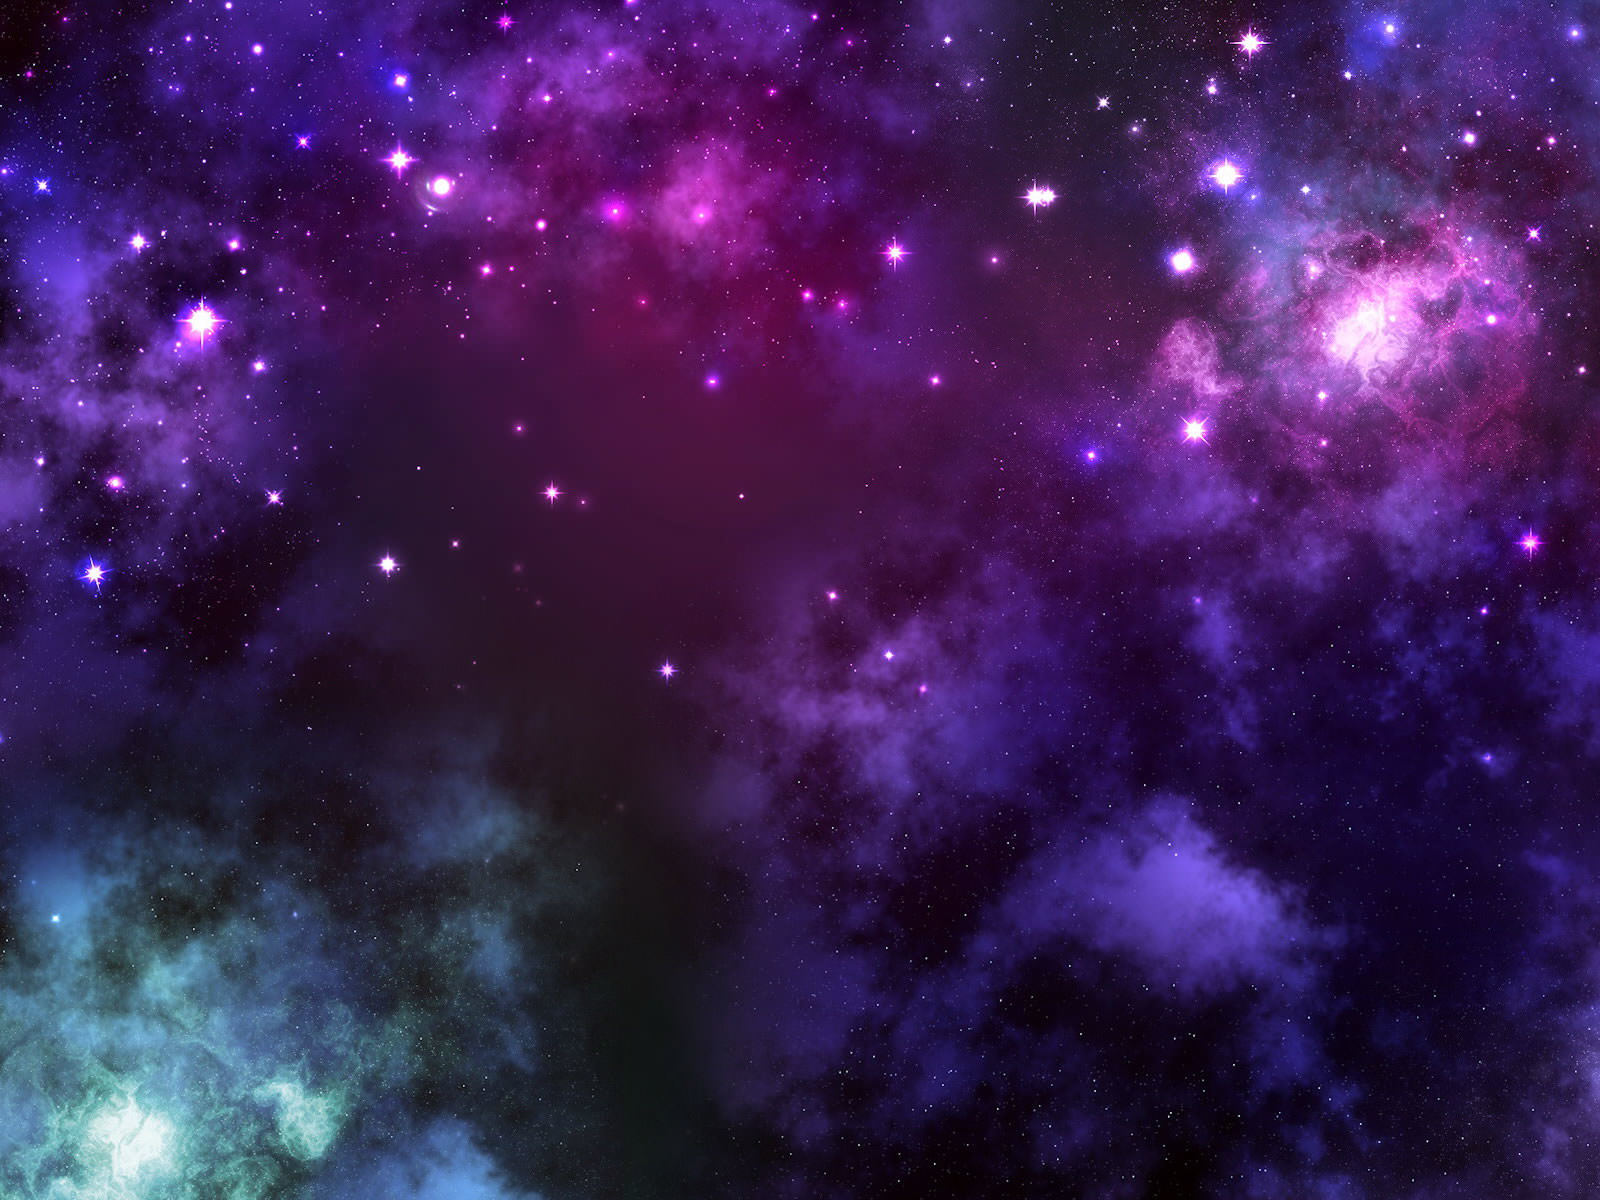 outer space wallpaper 1600x1200 1004101jpg